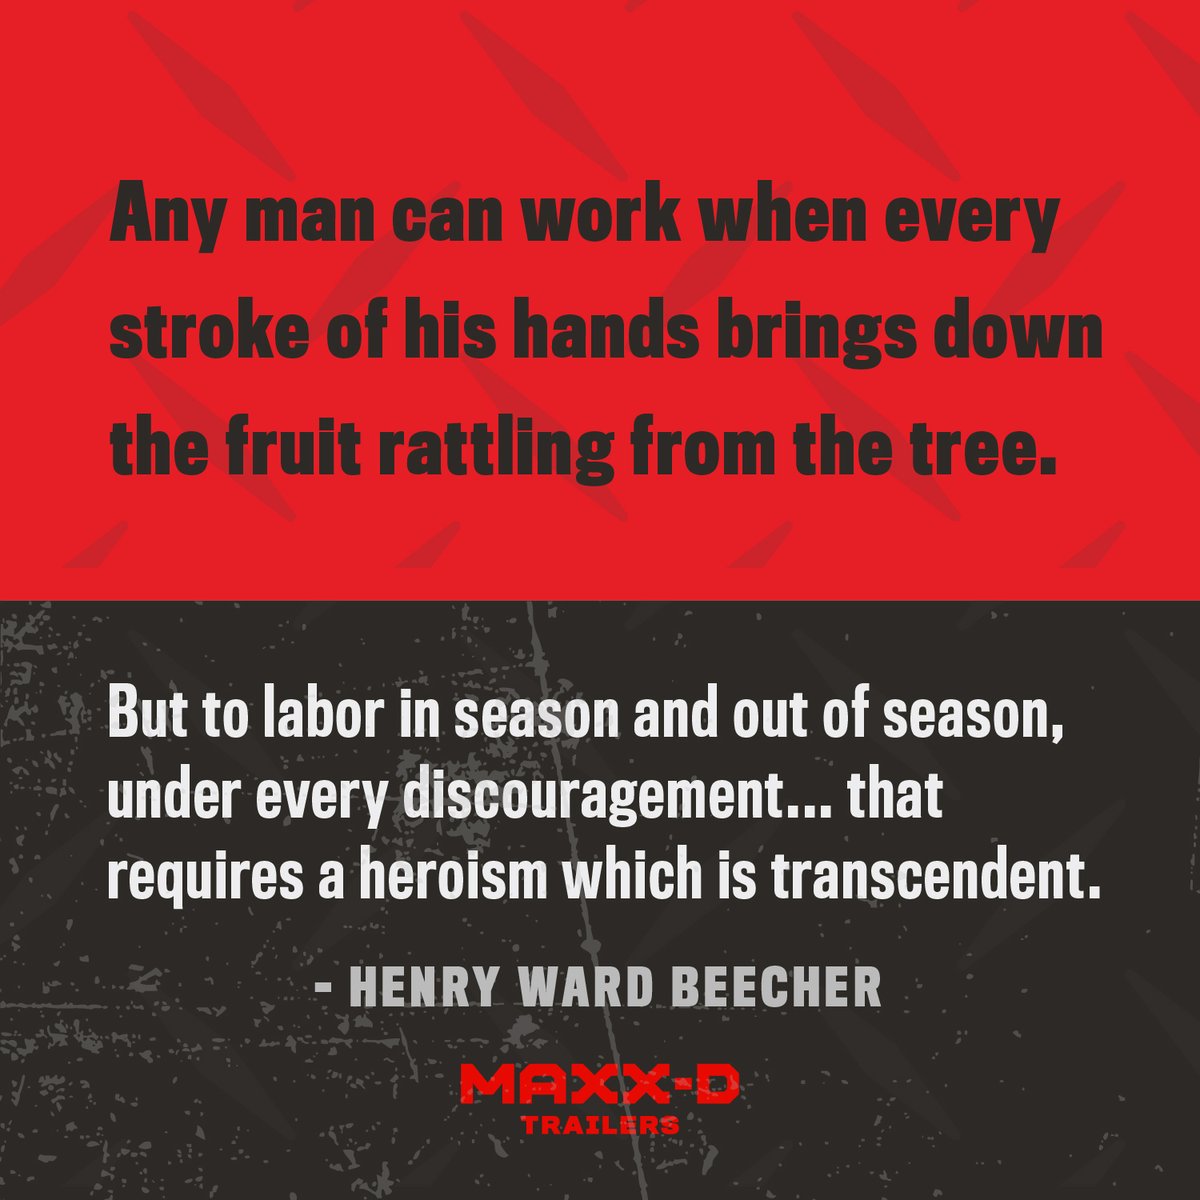 Embrace the challenges, stay resilient, and work harder than ever. Hats off to all the #bluecollarhaulers working day in and day out!

#maxxd #maxxdtrailers #trailersfortheworkingman #buildsomethinggreat  #bluecollar #workhardstayhumble #glorytoGod